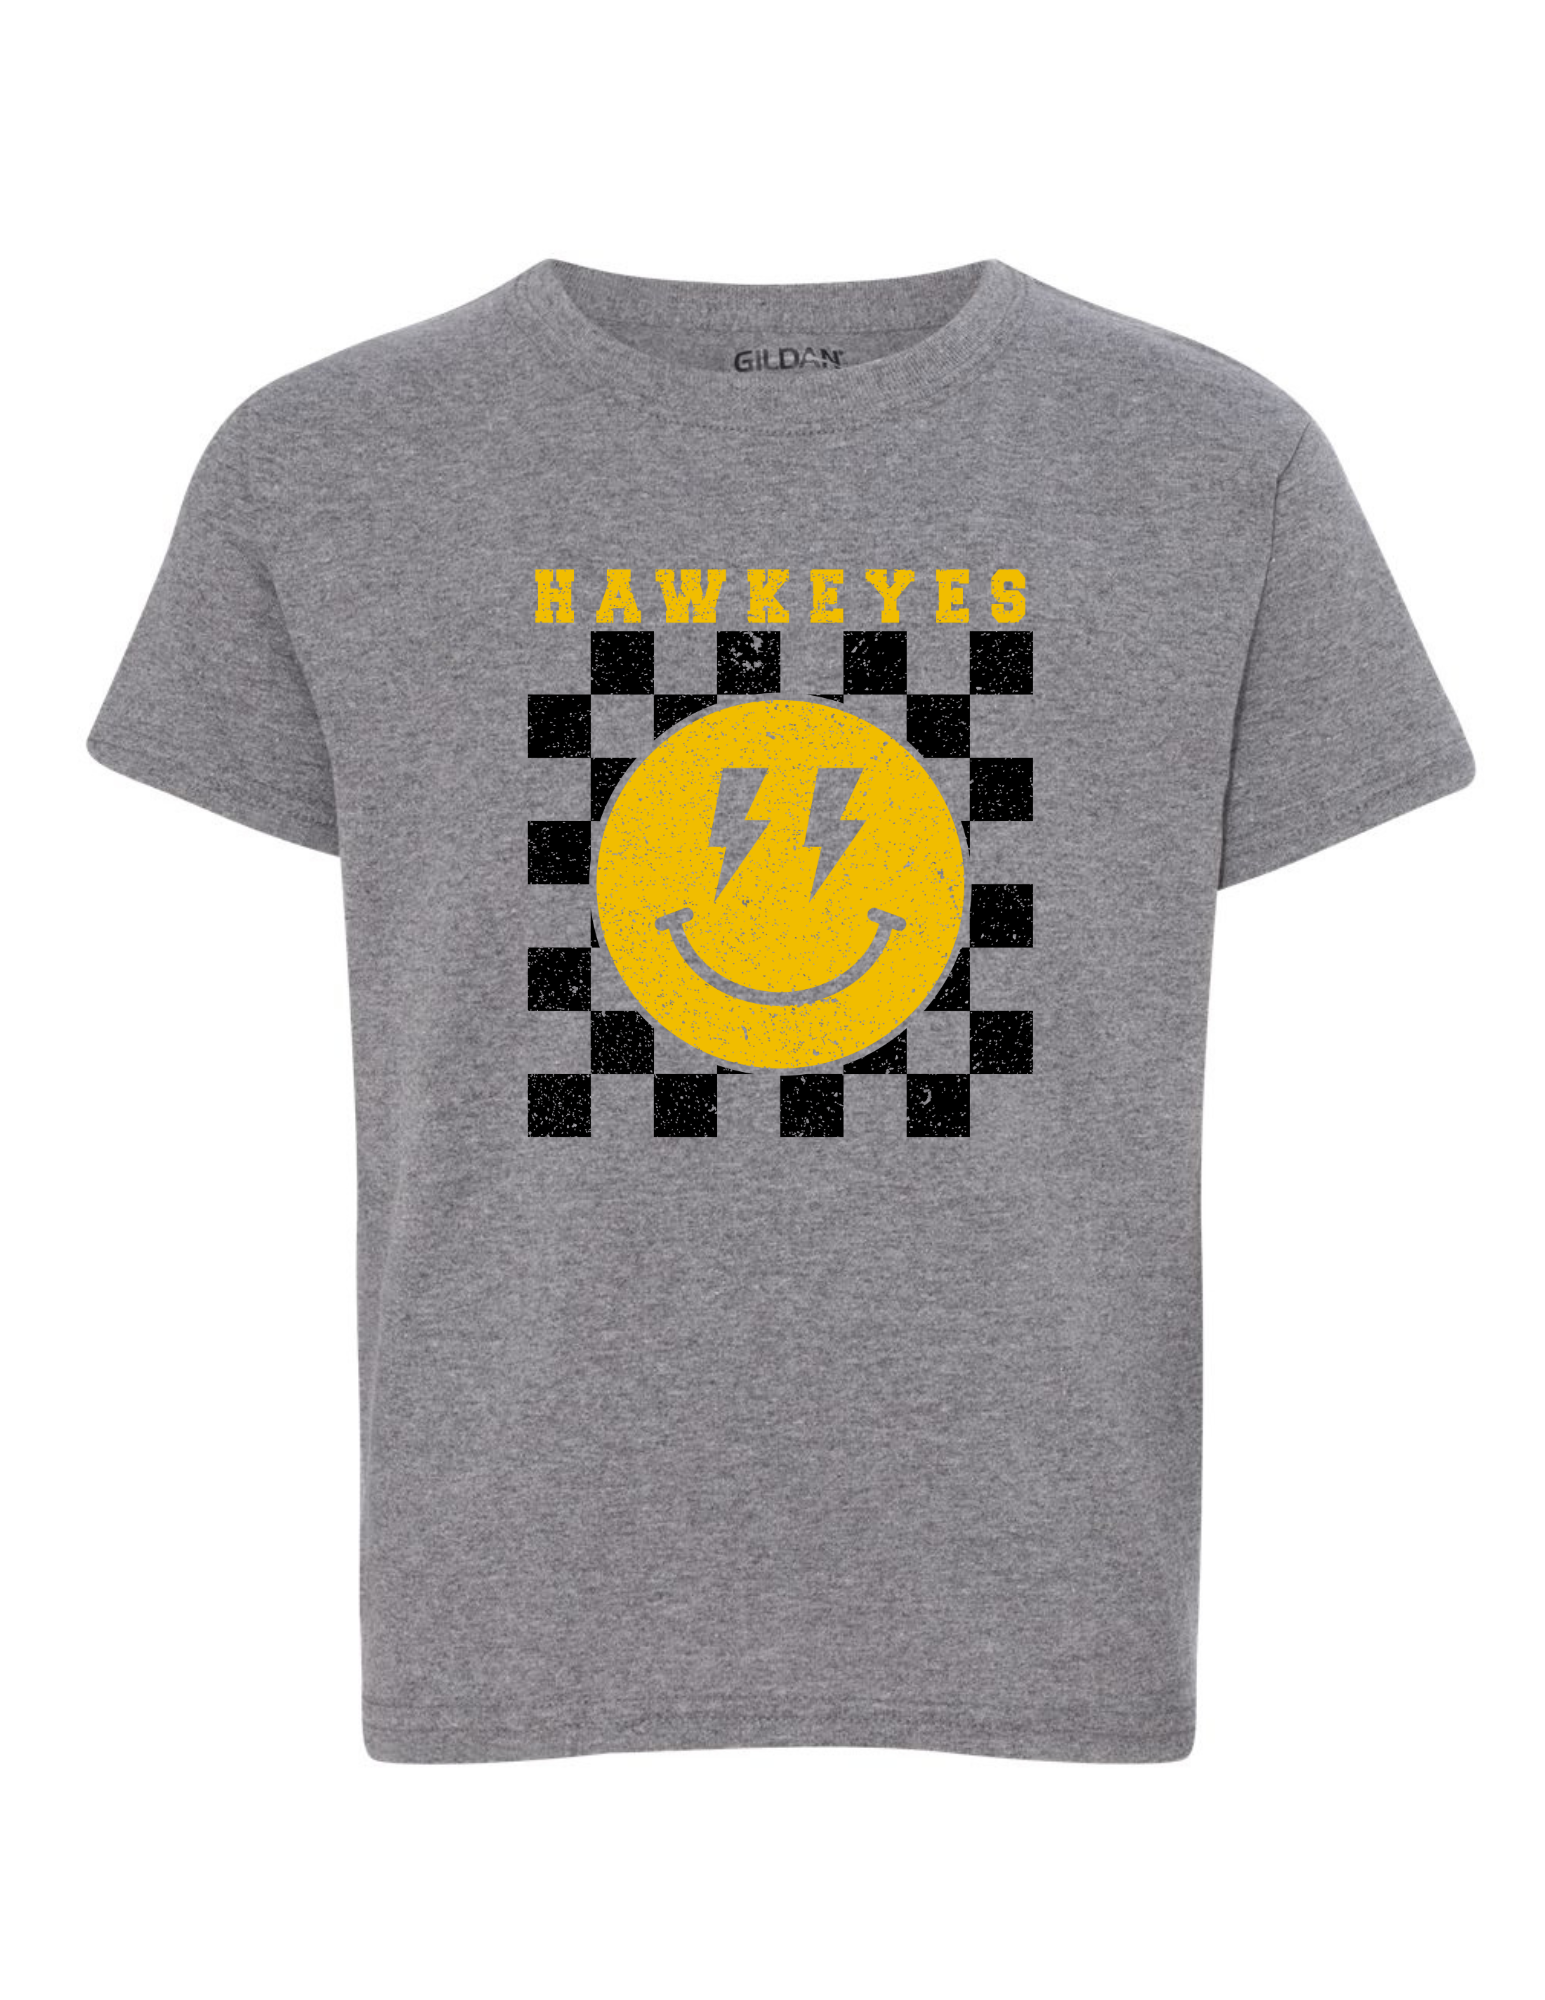 TODDLER/YOUTH Hawkeyes Smiley T-shirt